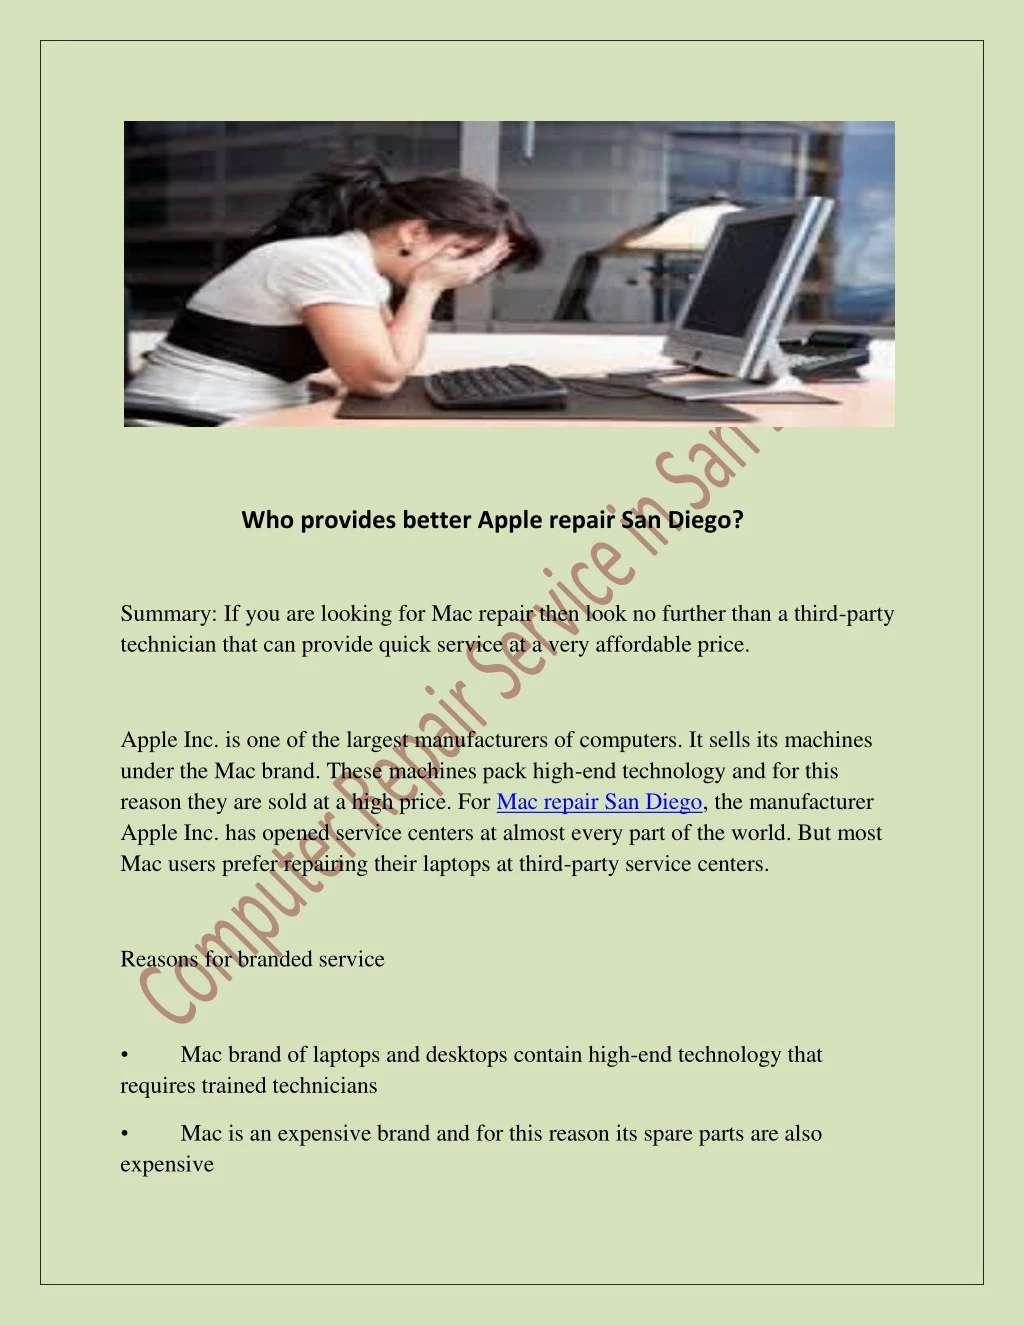 who provides better apple repair san diego